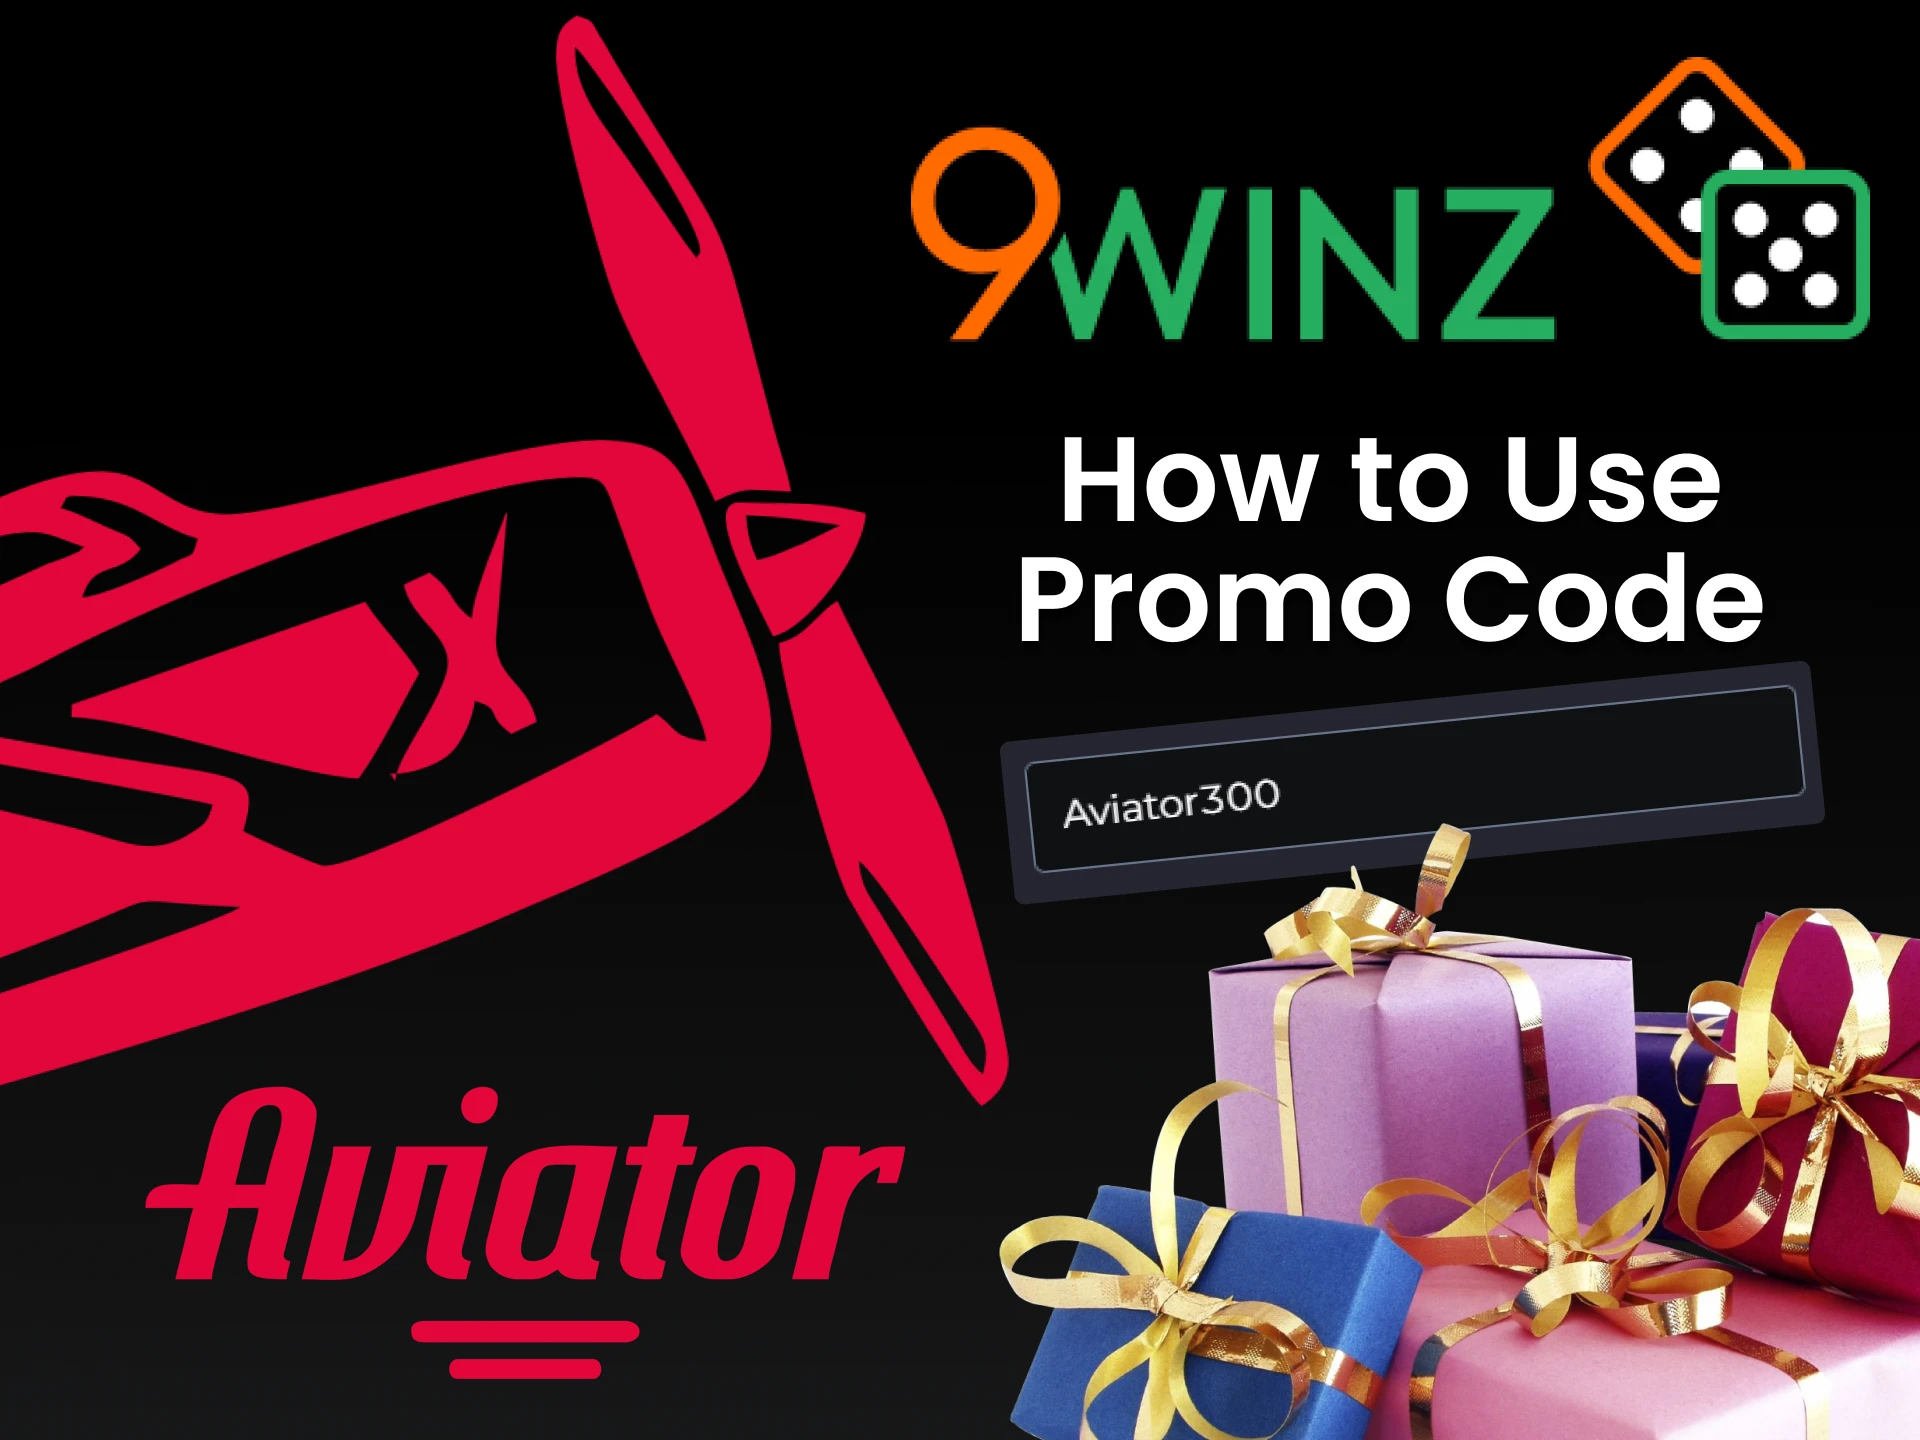 Learn how to apply and use a promo code for Aviator from 9winz.